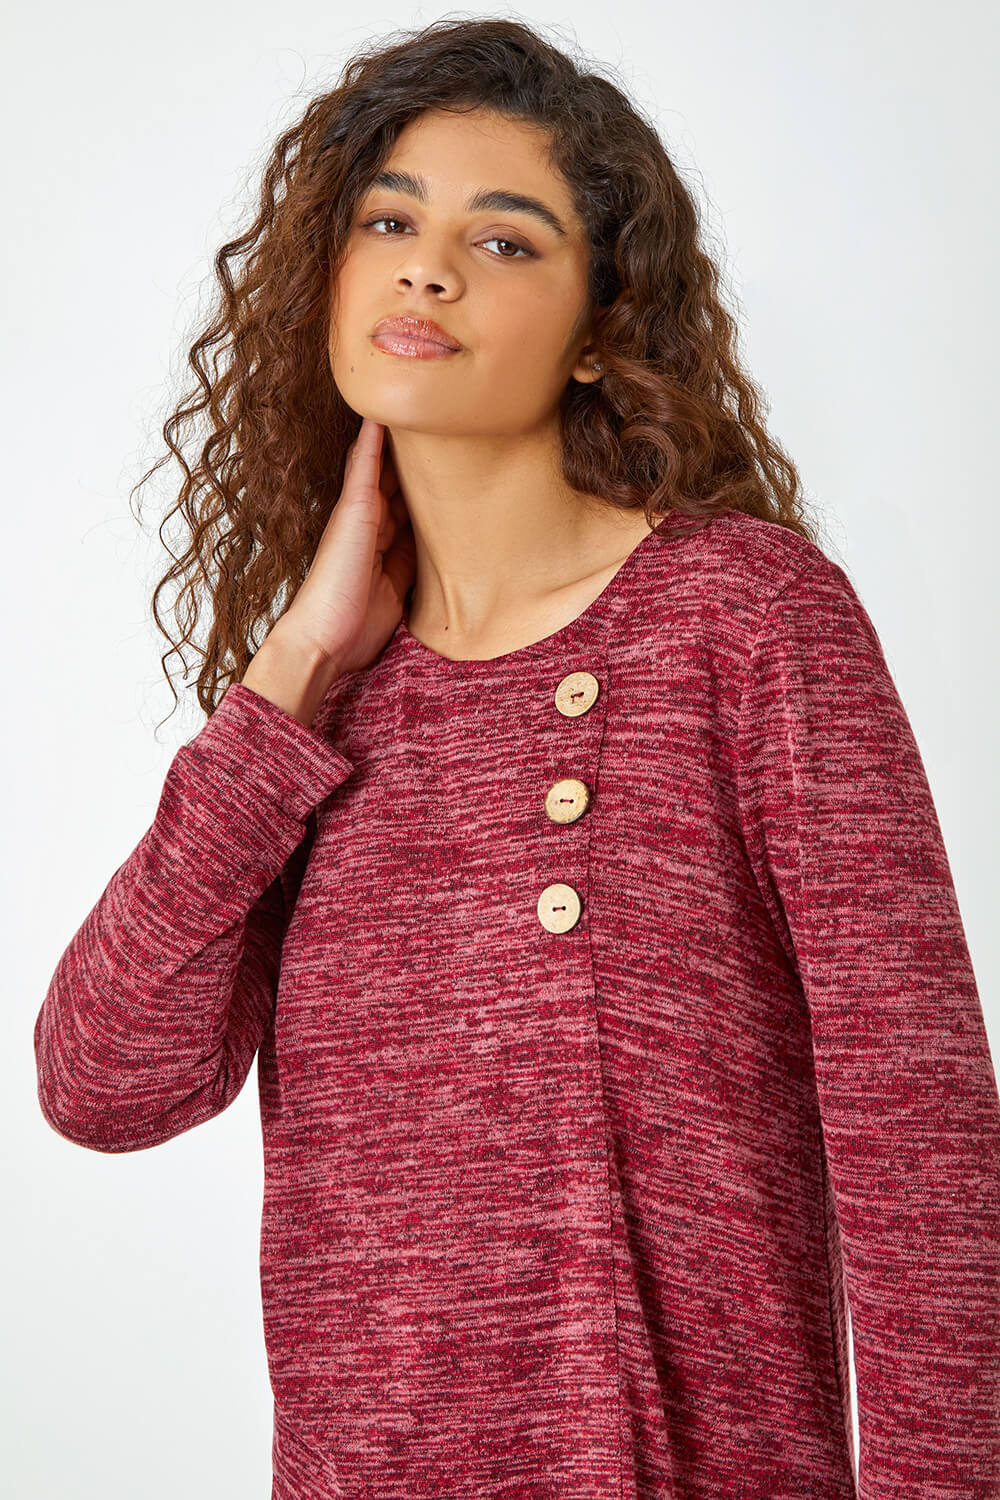 Maroon Button Stretch Knit Asymmetric Top, Image 4 of 5